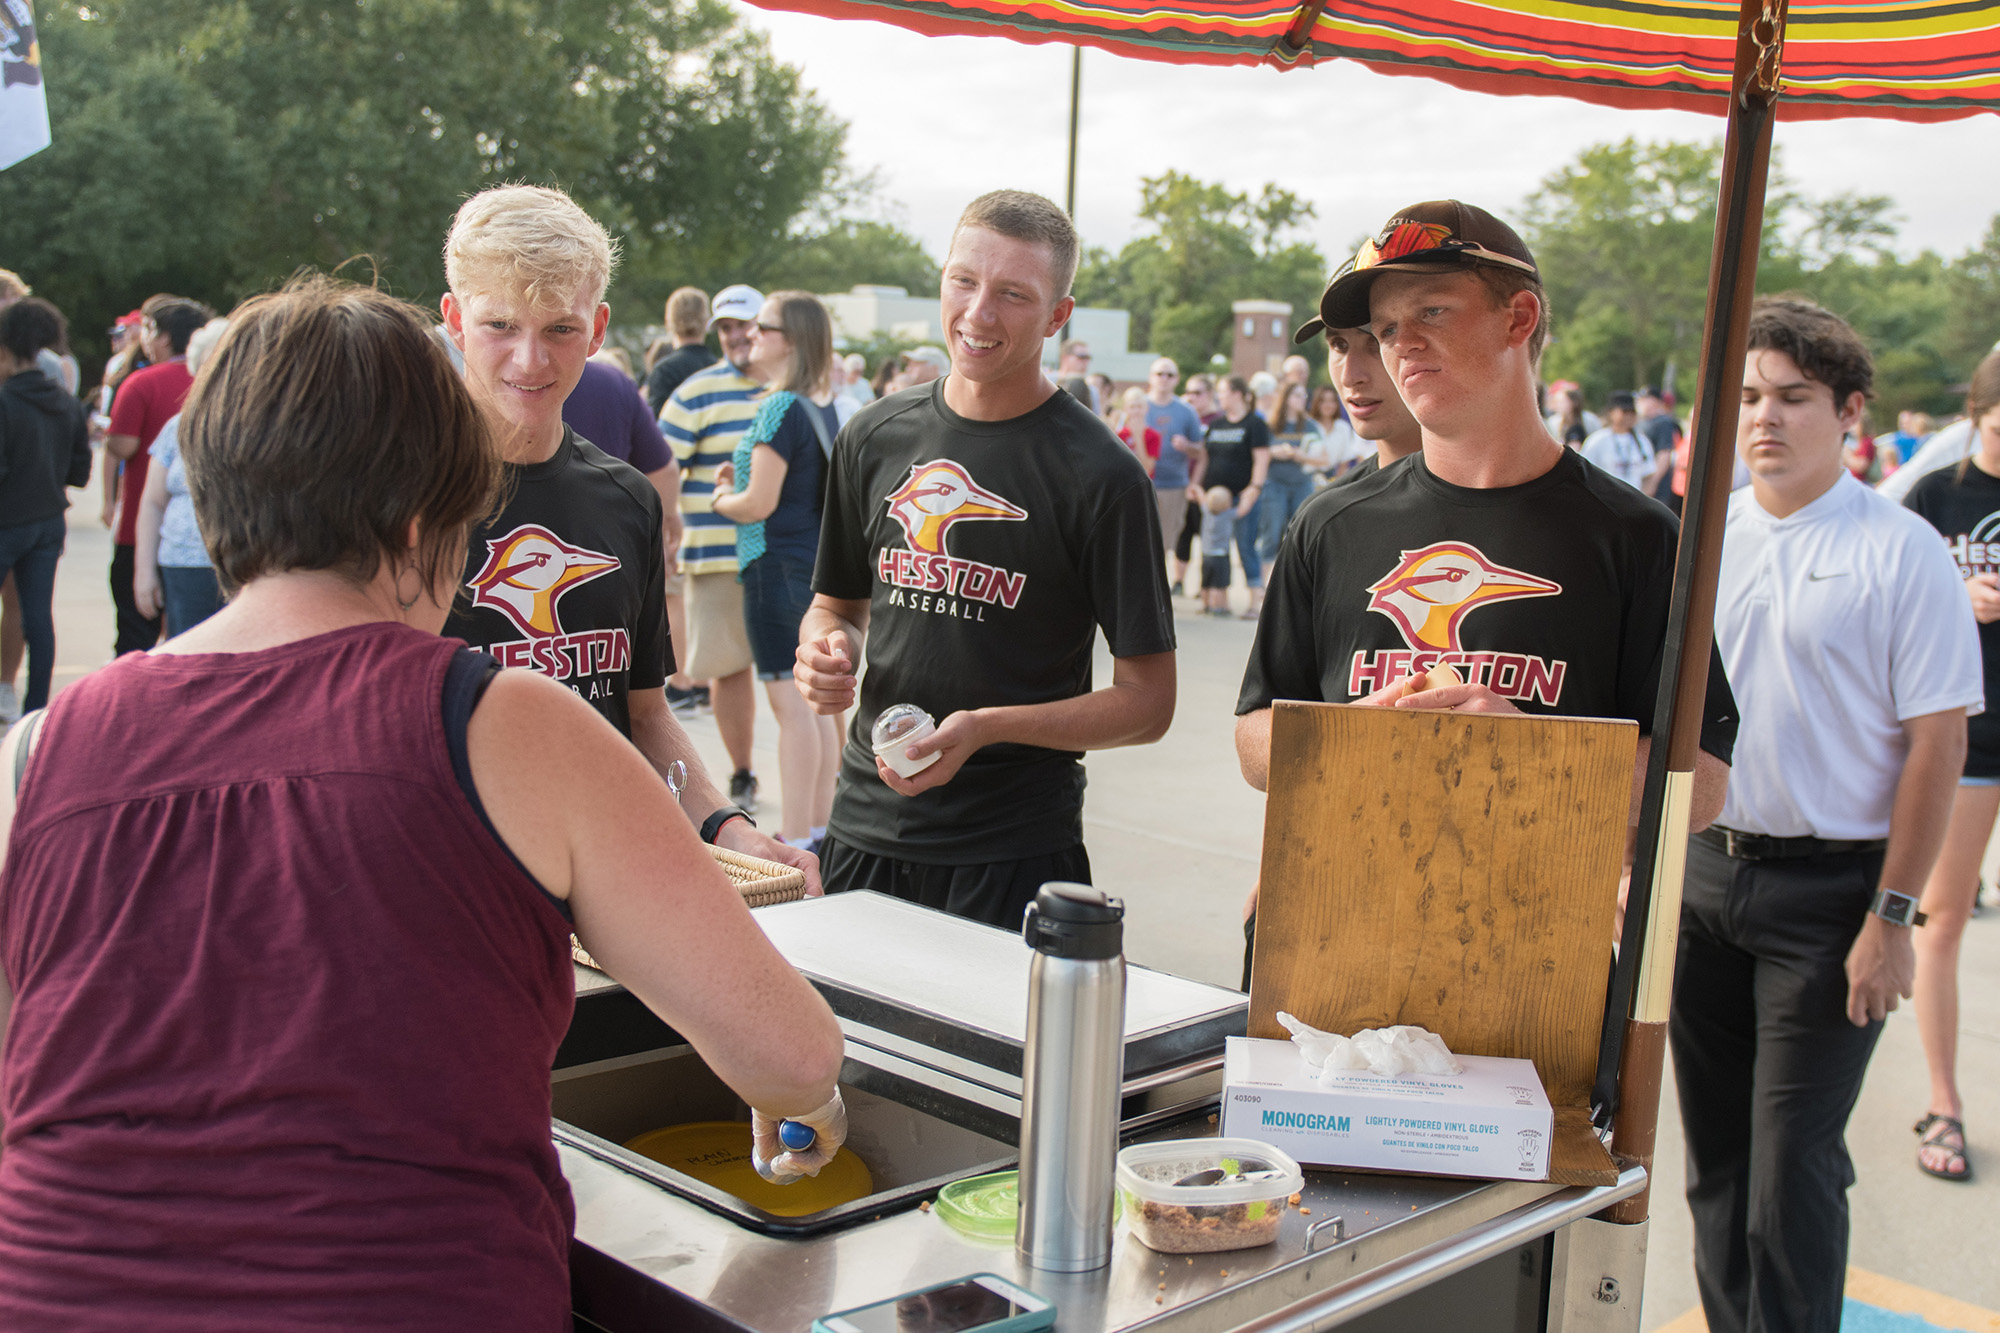 Communication prof and Salted Creamery owner Kendra Burkey serves ice cream to a quartet of Lark baseball players at the food truck supper.